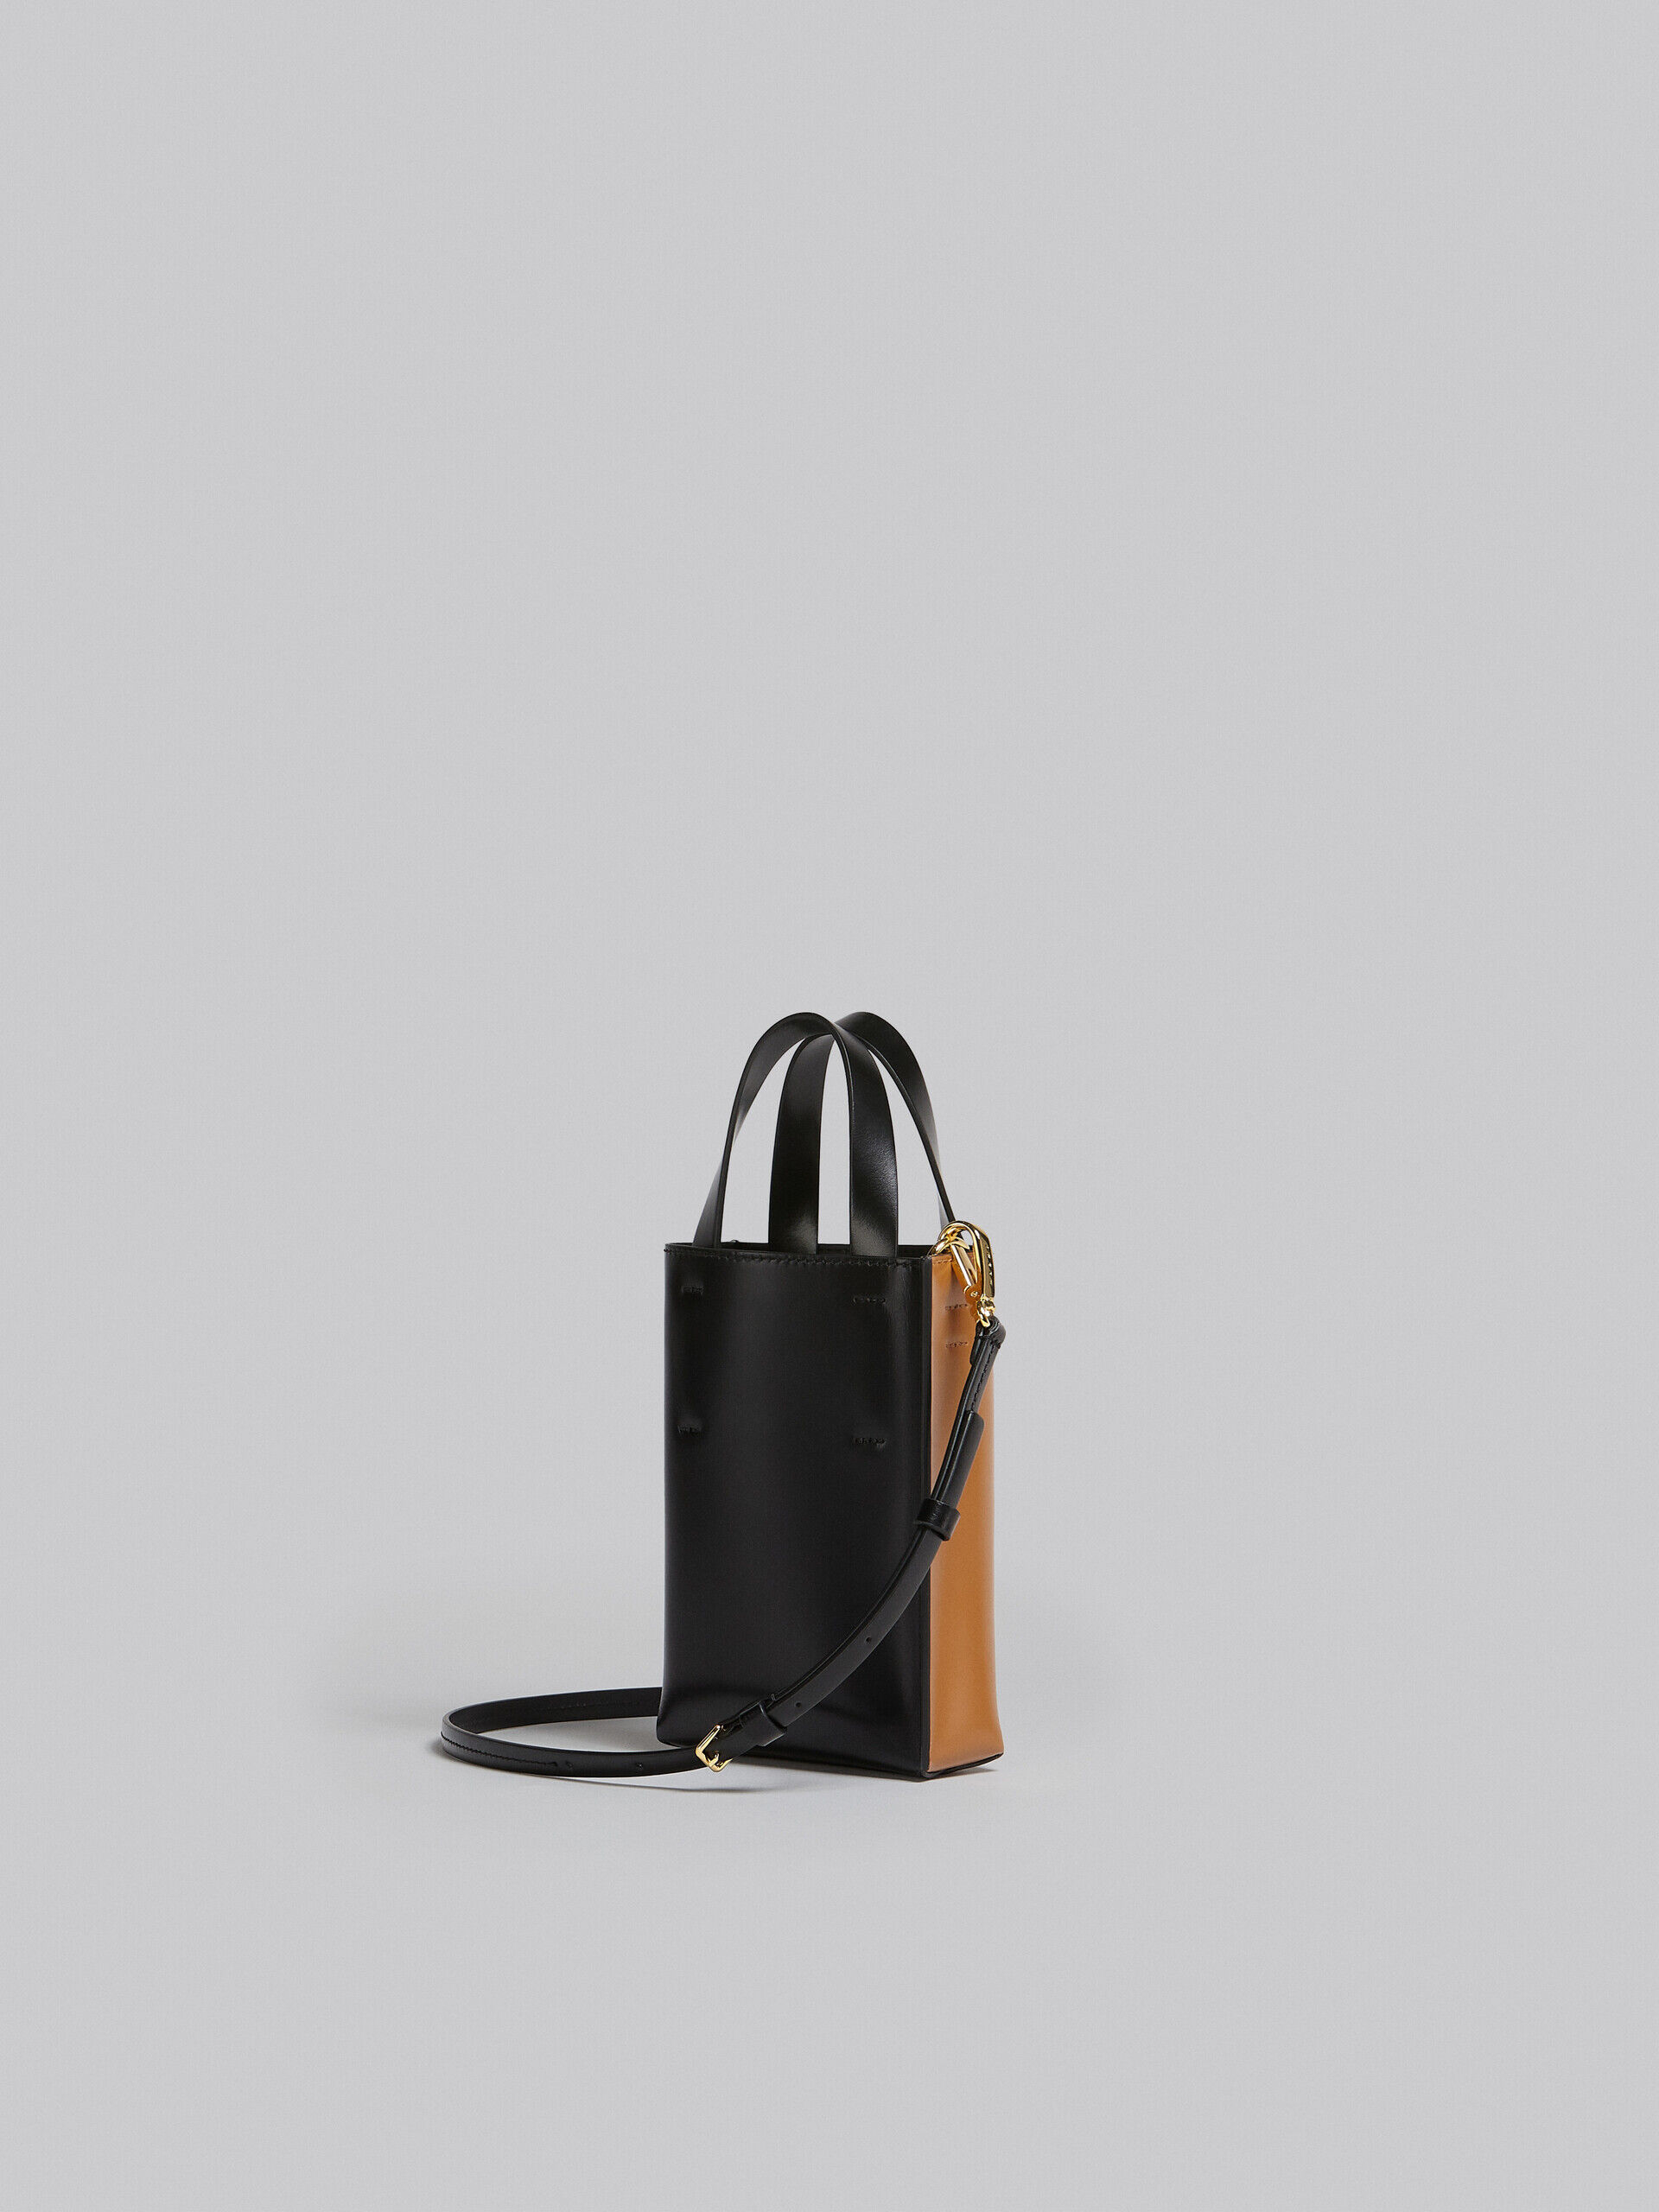 Museo Nano Bag in brown and black leather | Marni